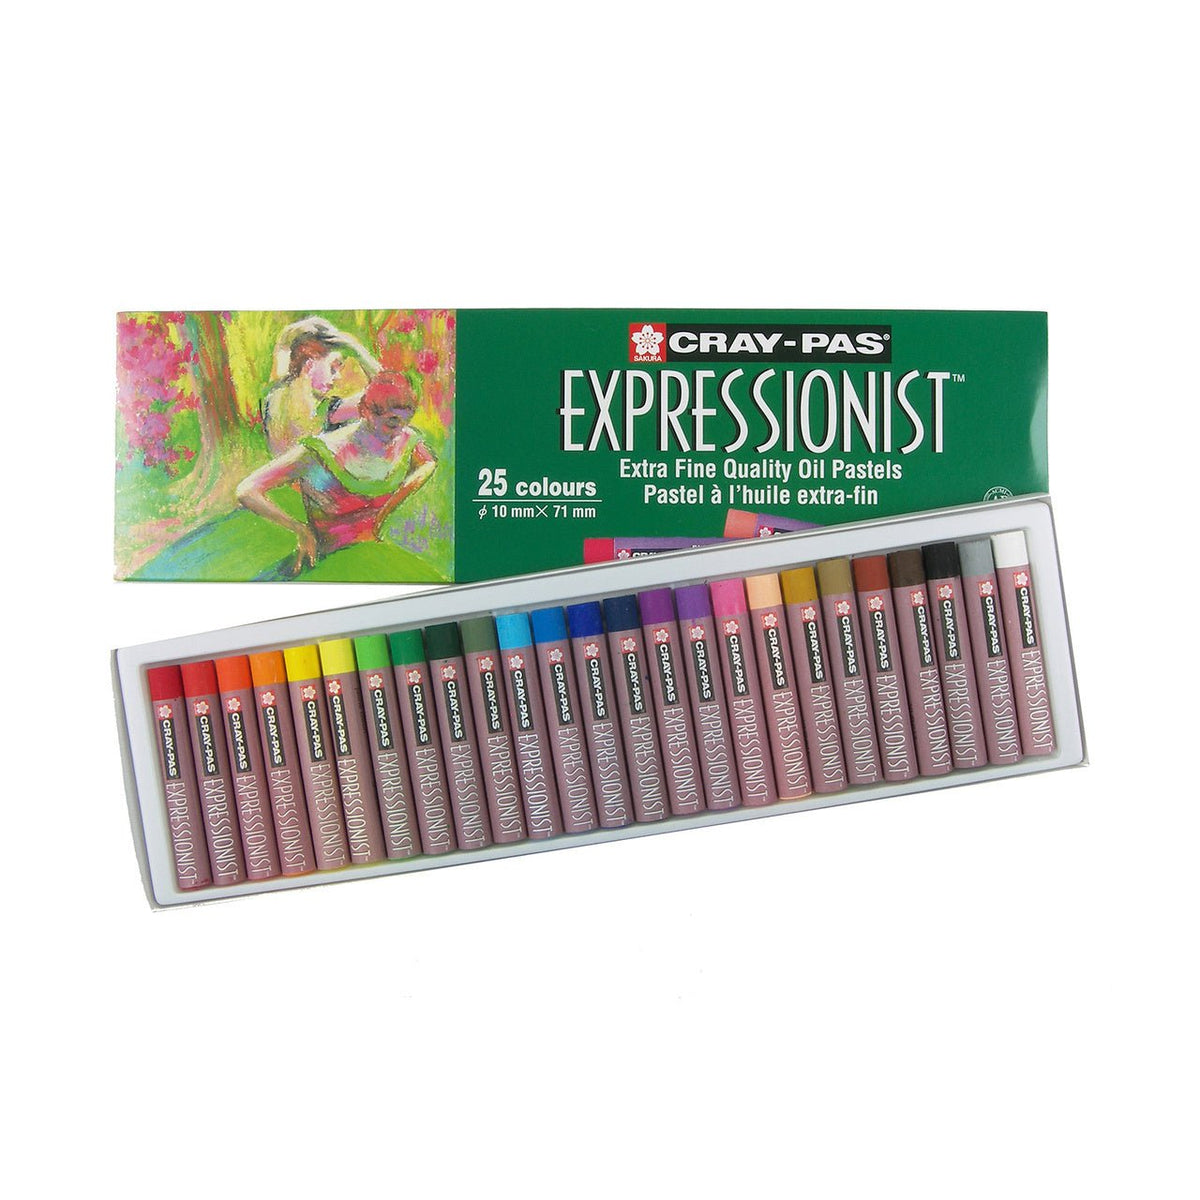 Cray-Pas Expressionist Oil Pastel Set of 12